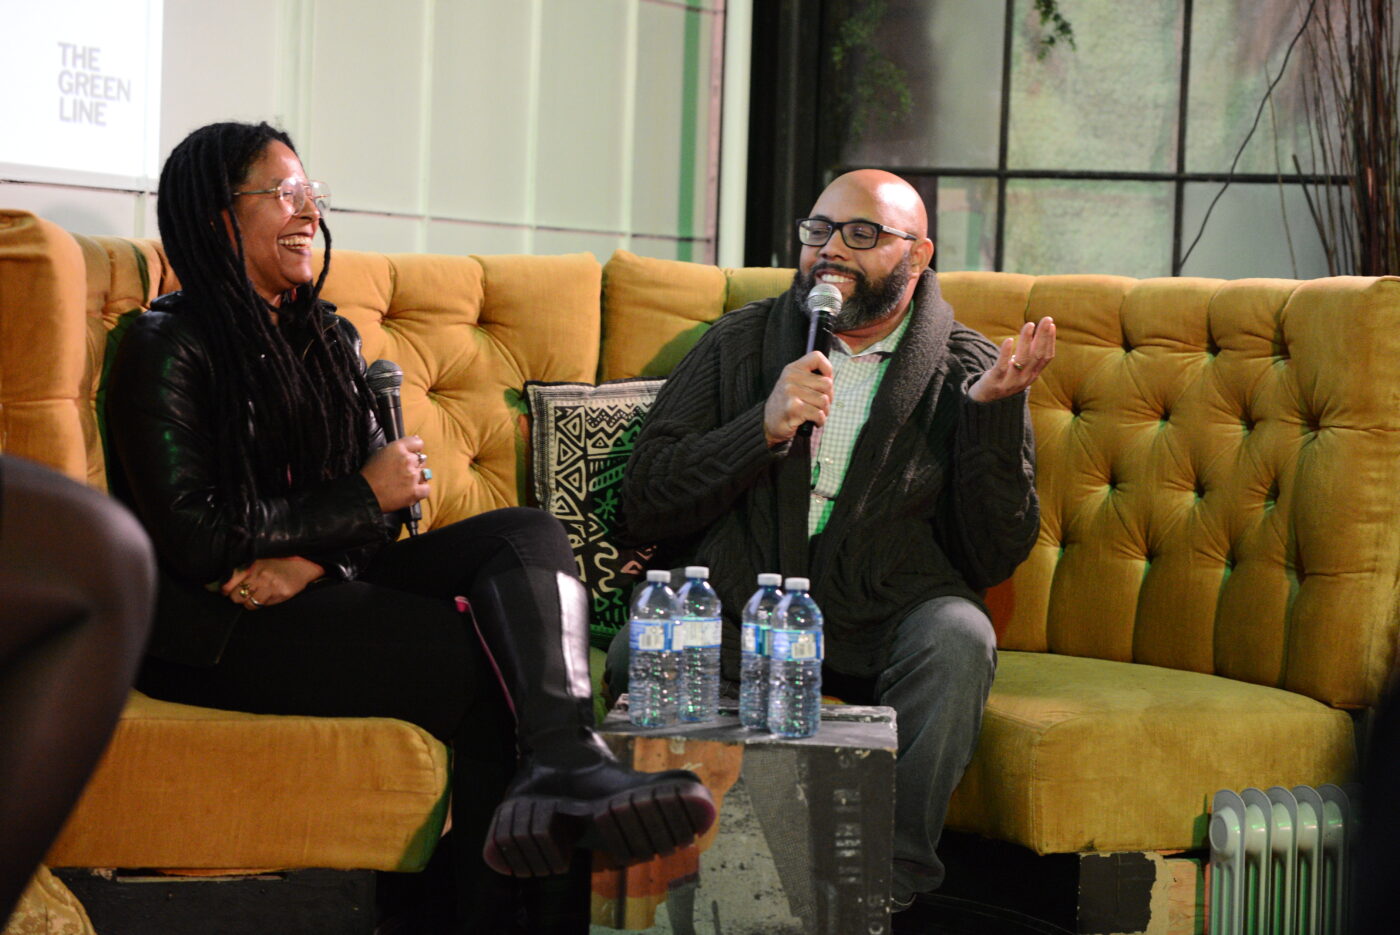 Panelists Dawn Wilkinson (left) and Anthony Farrell (right) discuss their experiences in the industry as Black filmmakers.